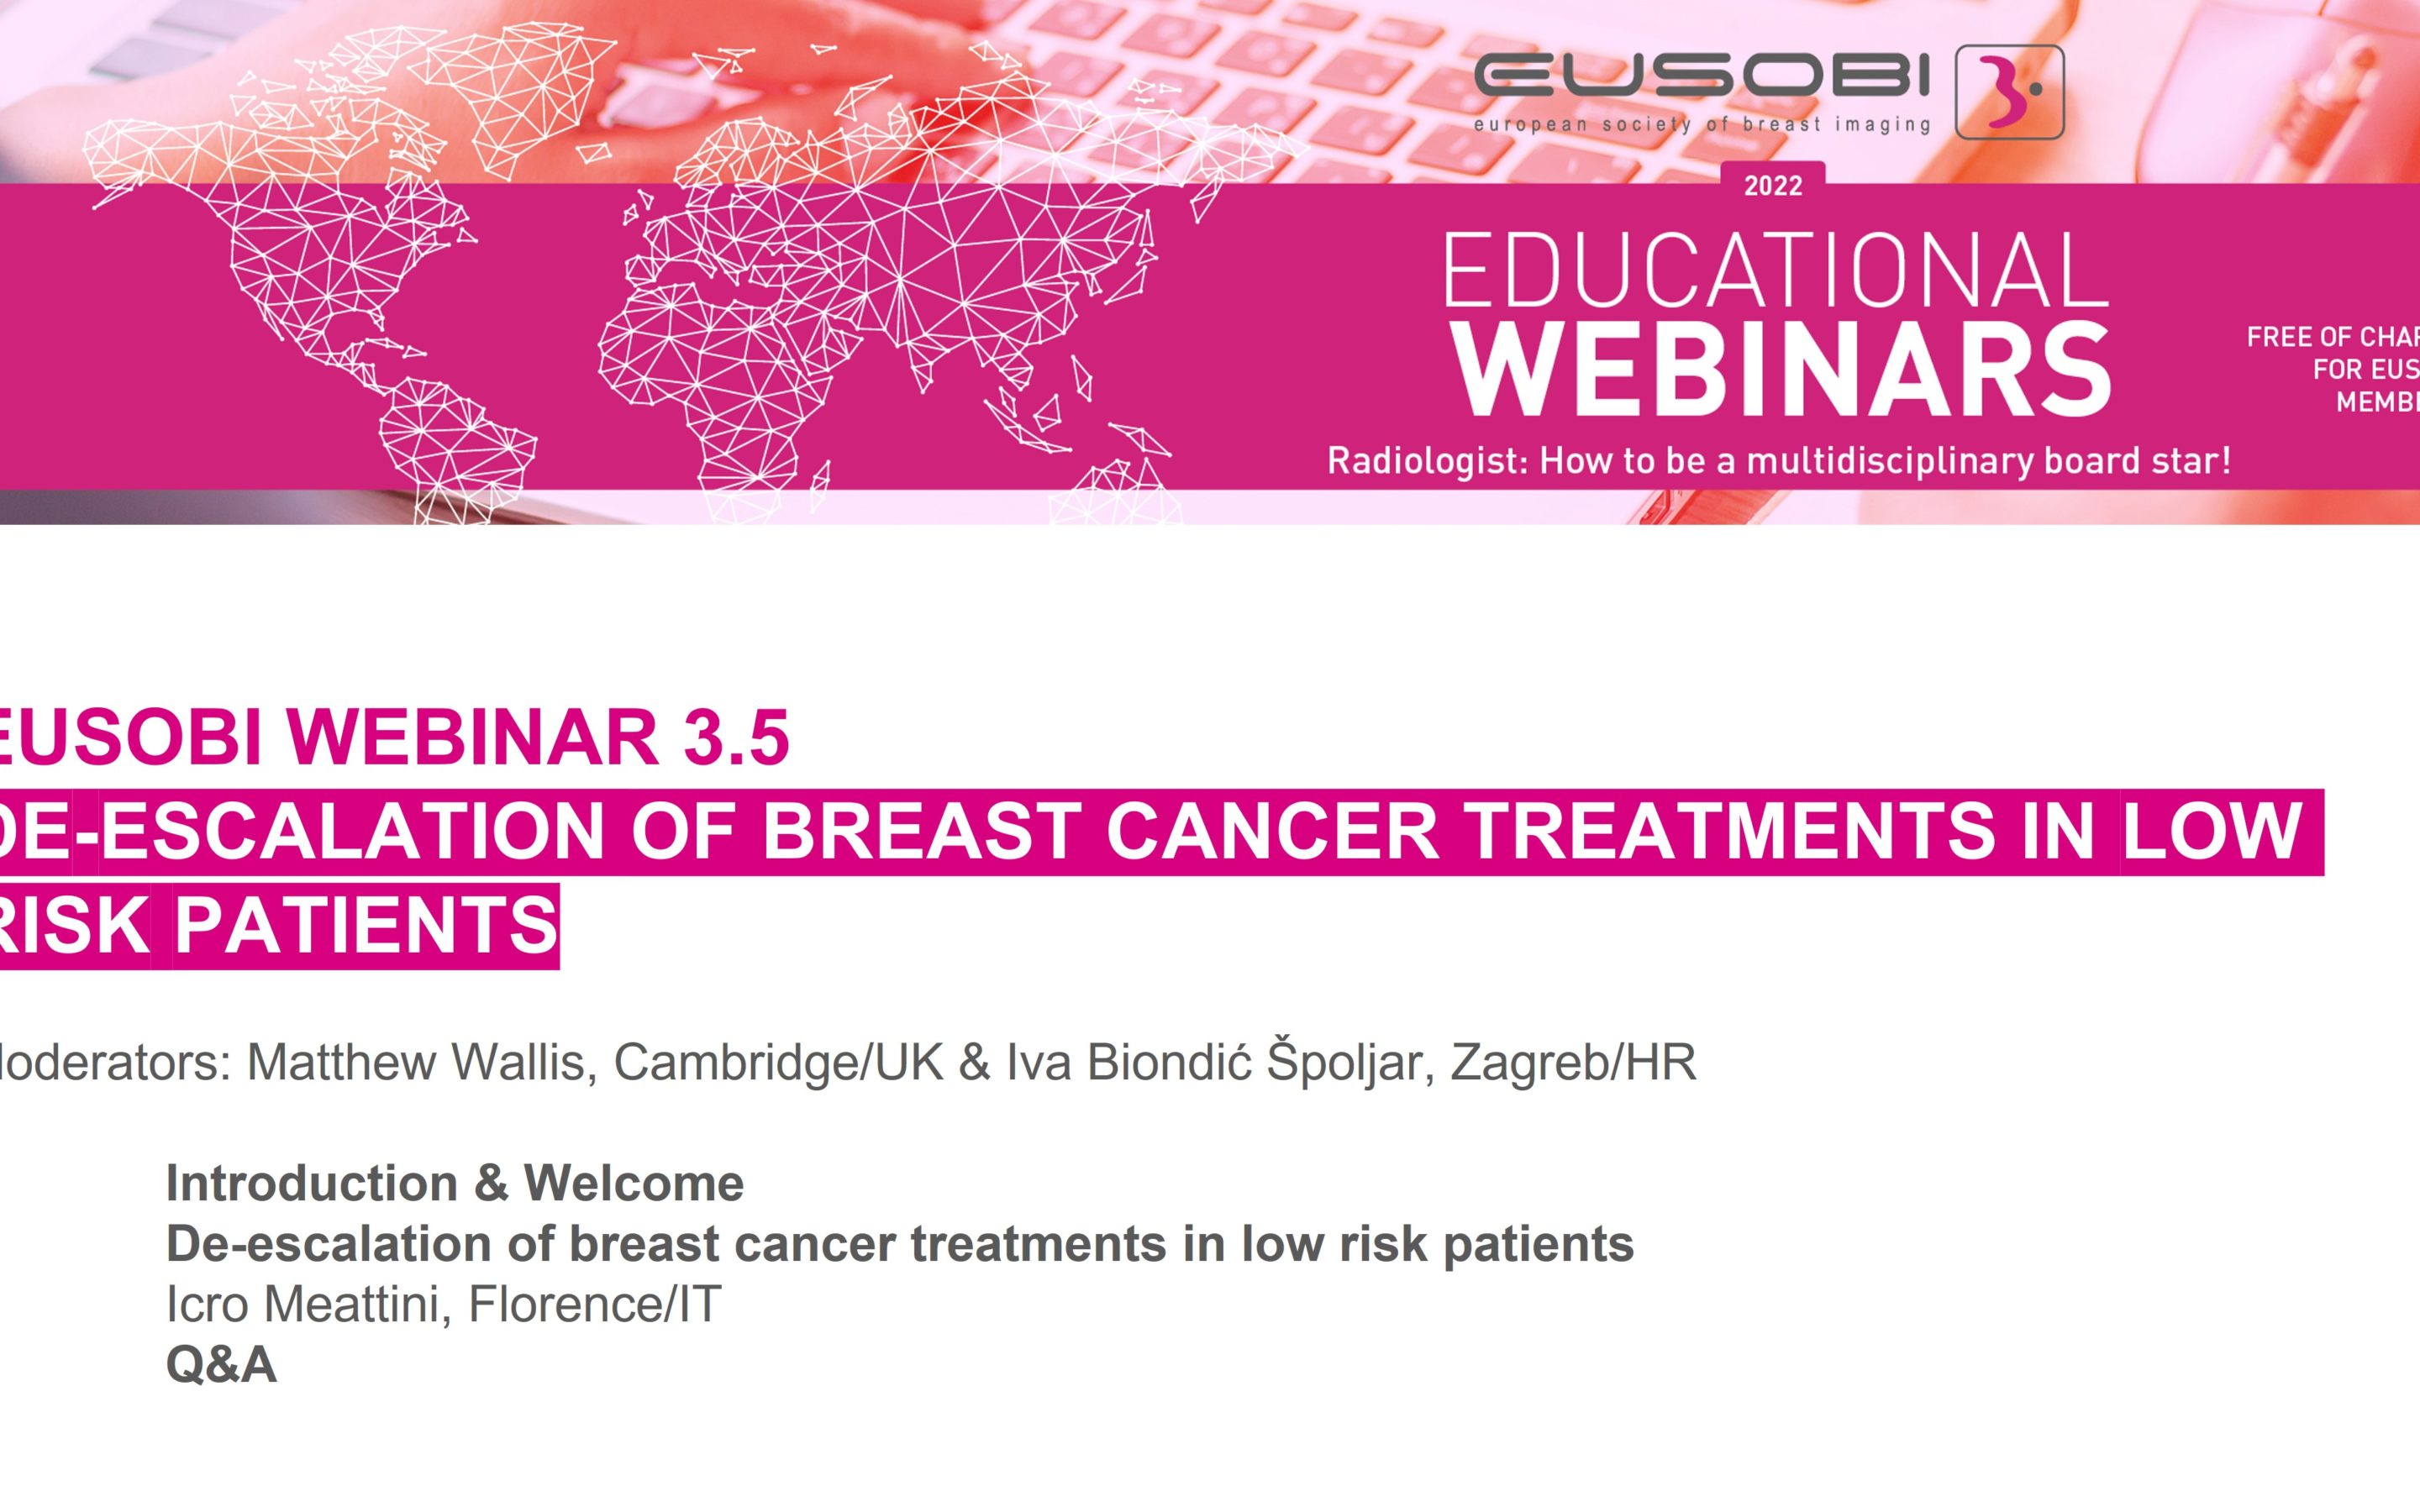 3.5 / De-escalation of breast cancer treatments in low risk patients